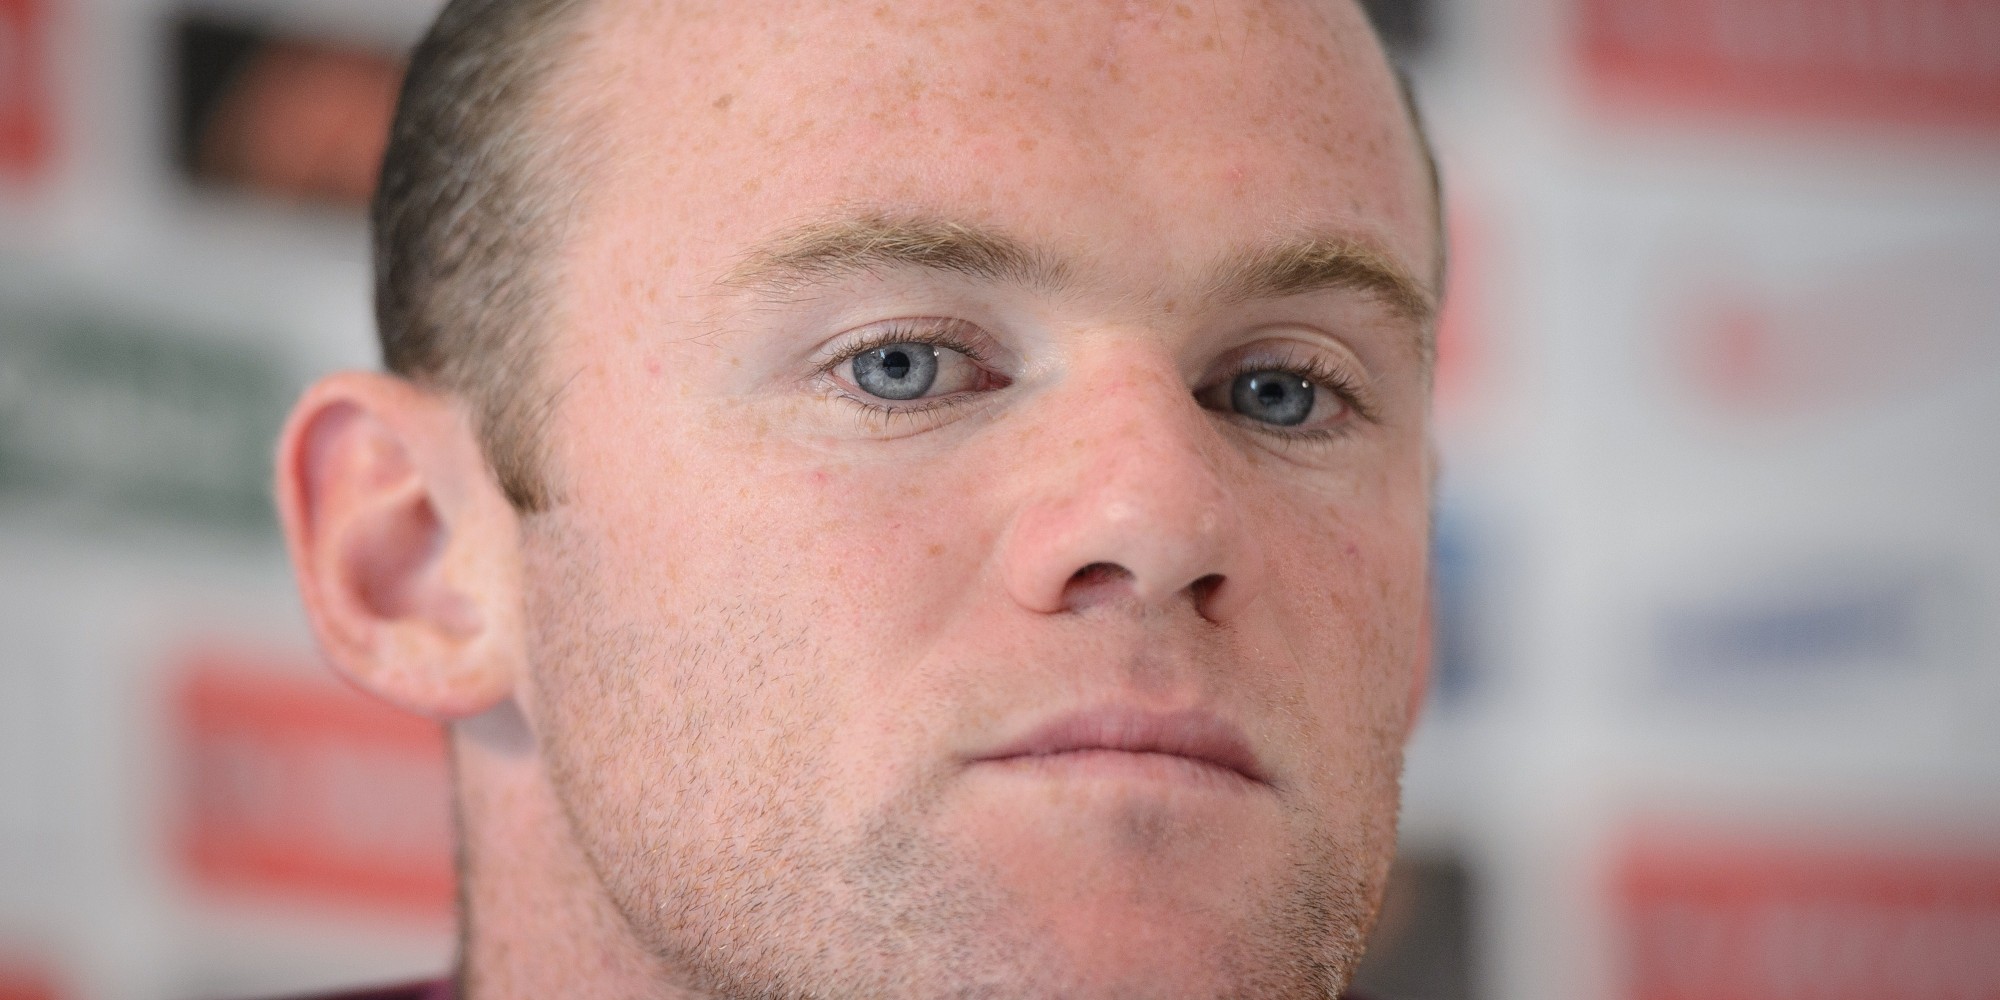 Why Dropping Wayne Rooney Could Be the Remedy to His Disappointing Form